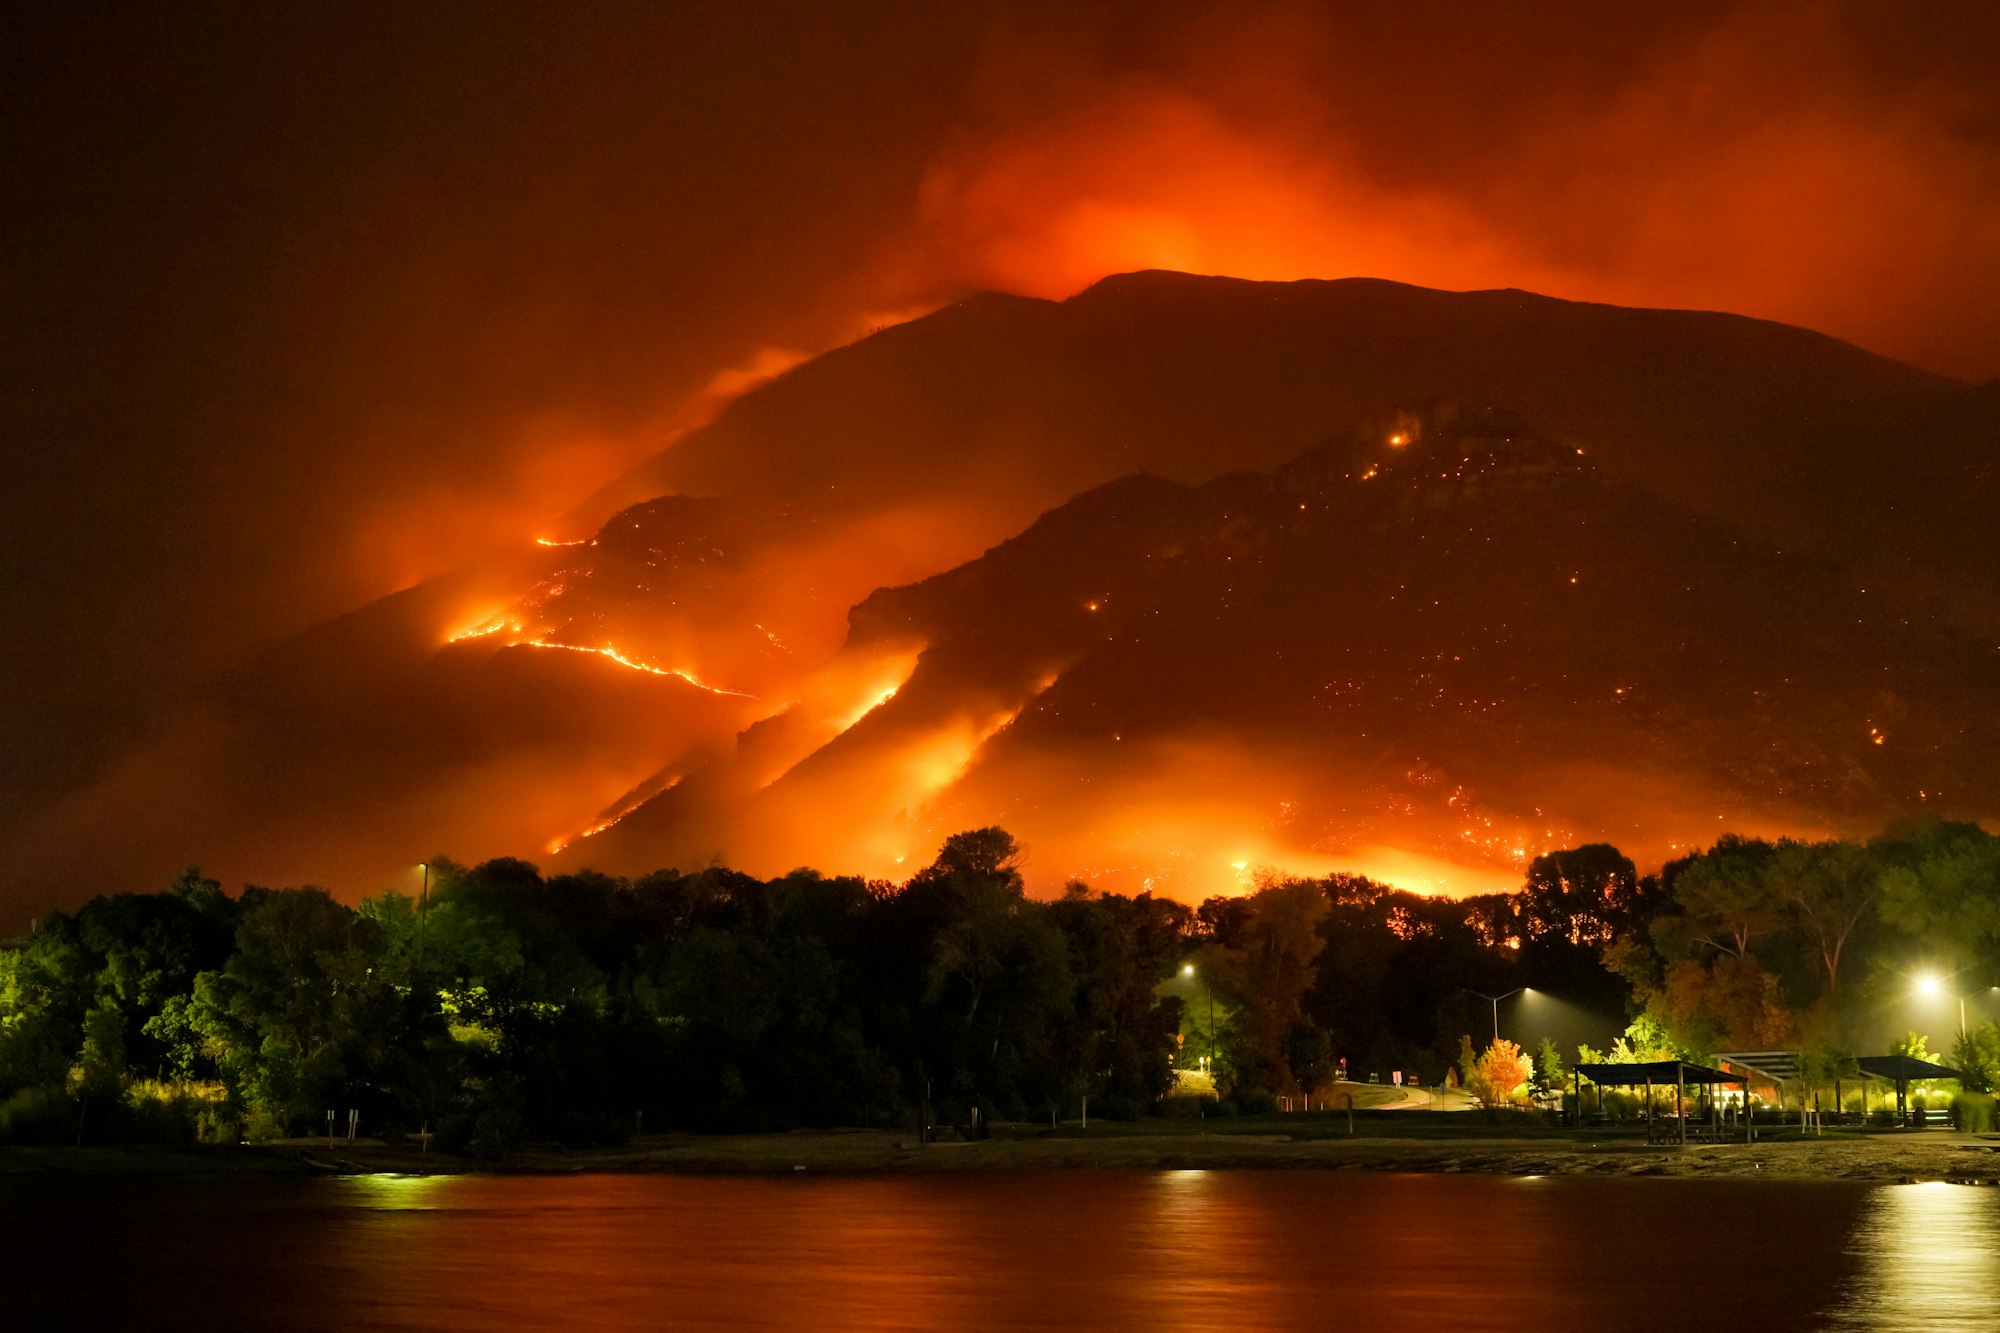 Climate Scientist Claims He Overstated Impact of Global Warming on Wildfires